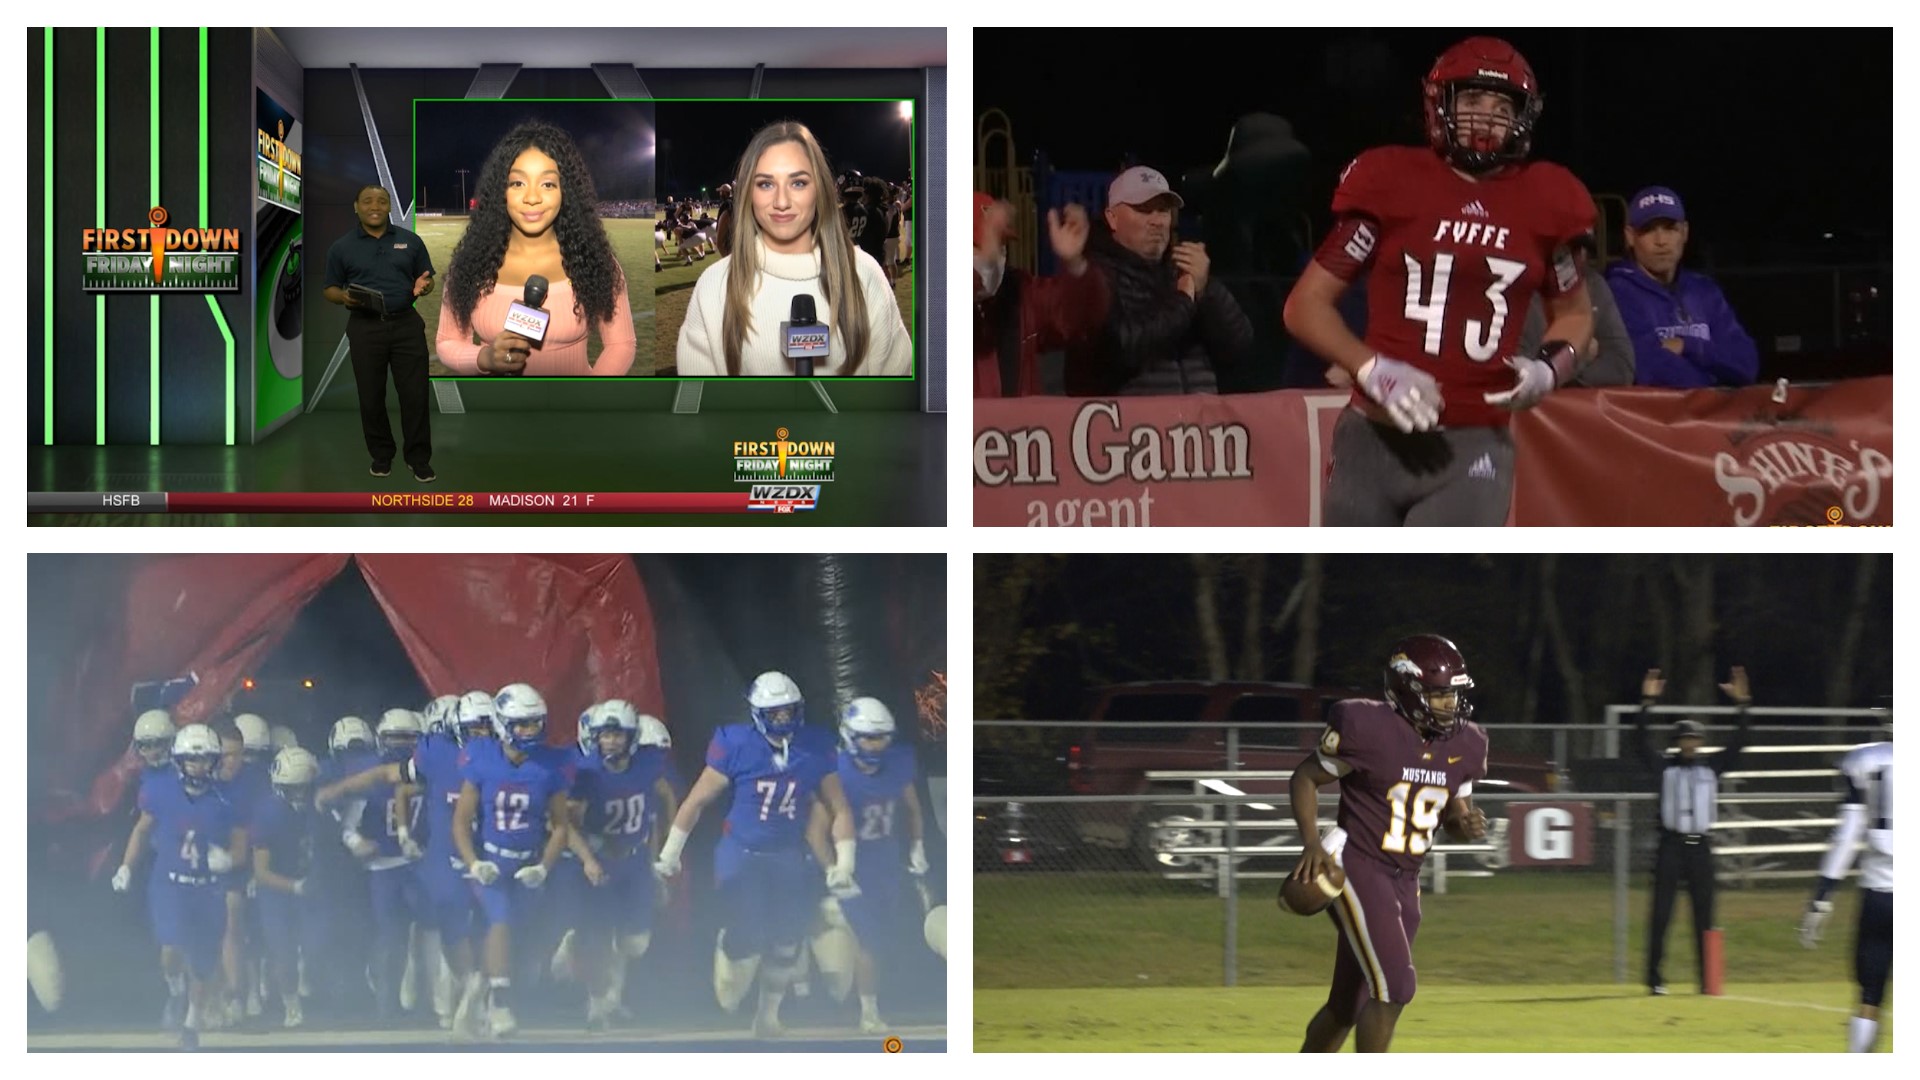 The road to the 2020 Super 7 Championships continued Friday with Round 2 in the AHSAA football playoffs. See scores and highlights on a new episode of FDFN.